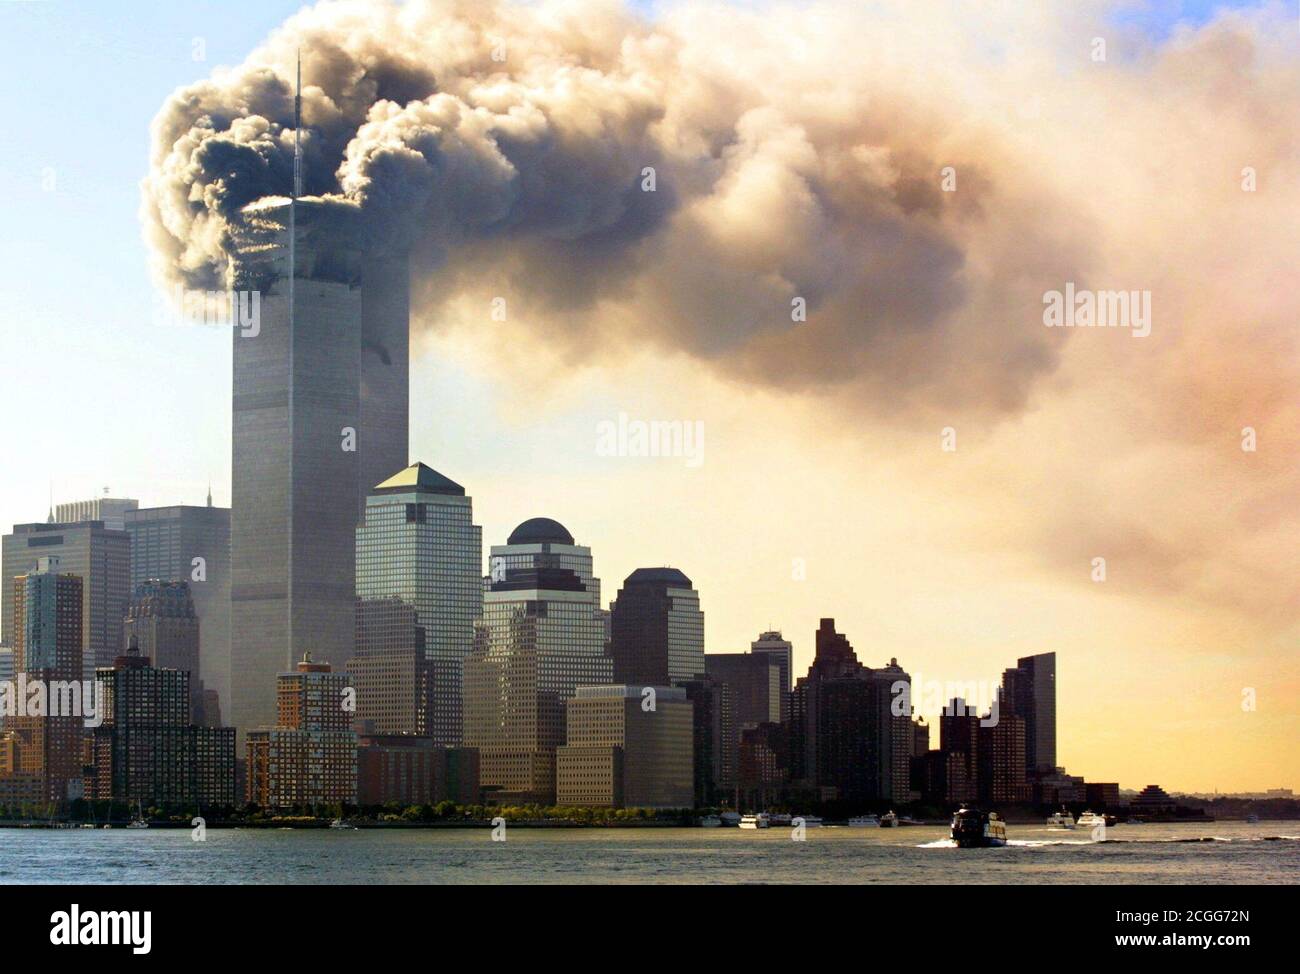 https://c8.alamy.com/comp/2CGG72N/view-of-the-burning-world-trade-center-in-new-york-after-the-attack-on-september-11-2001-this-morning-two-planes-raced-into-the-towers-of-the-world-trade-center-in-quick-succession-in-addition-to-the-occupants-of-the-machines-numerous-people-were-killed-inside-the-two-skyscrapers-in-the-heavy-explosions-apparently-it-is-a-targeted-attack-by-terrorist-suicide-bombers-the-upper-parts-of-the-skyscraper-went-up-in-flames-parts-of-the-wreckage-and-buildings-of-the-411-meter-high-twin-towers-flew-onto-the-street-with-a-perfectly-clear-view-the-machines-had-raced-into-the-houses-within-18-mi-2CGG72N.jpg